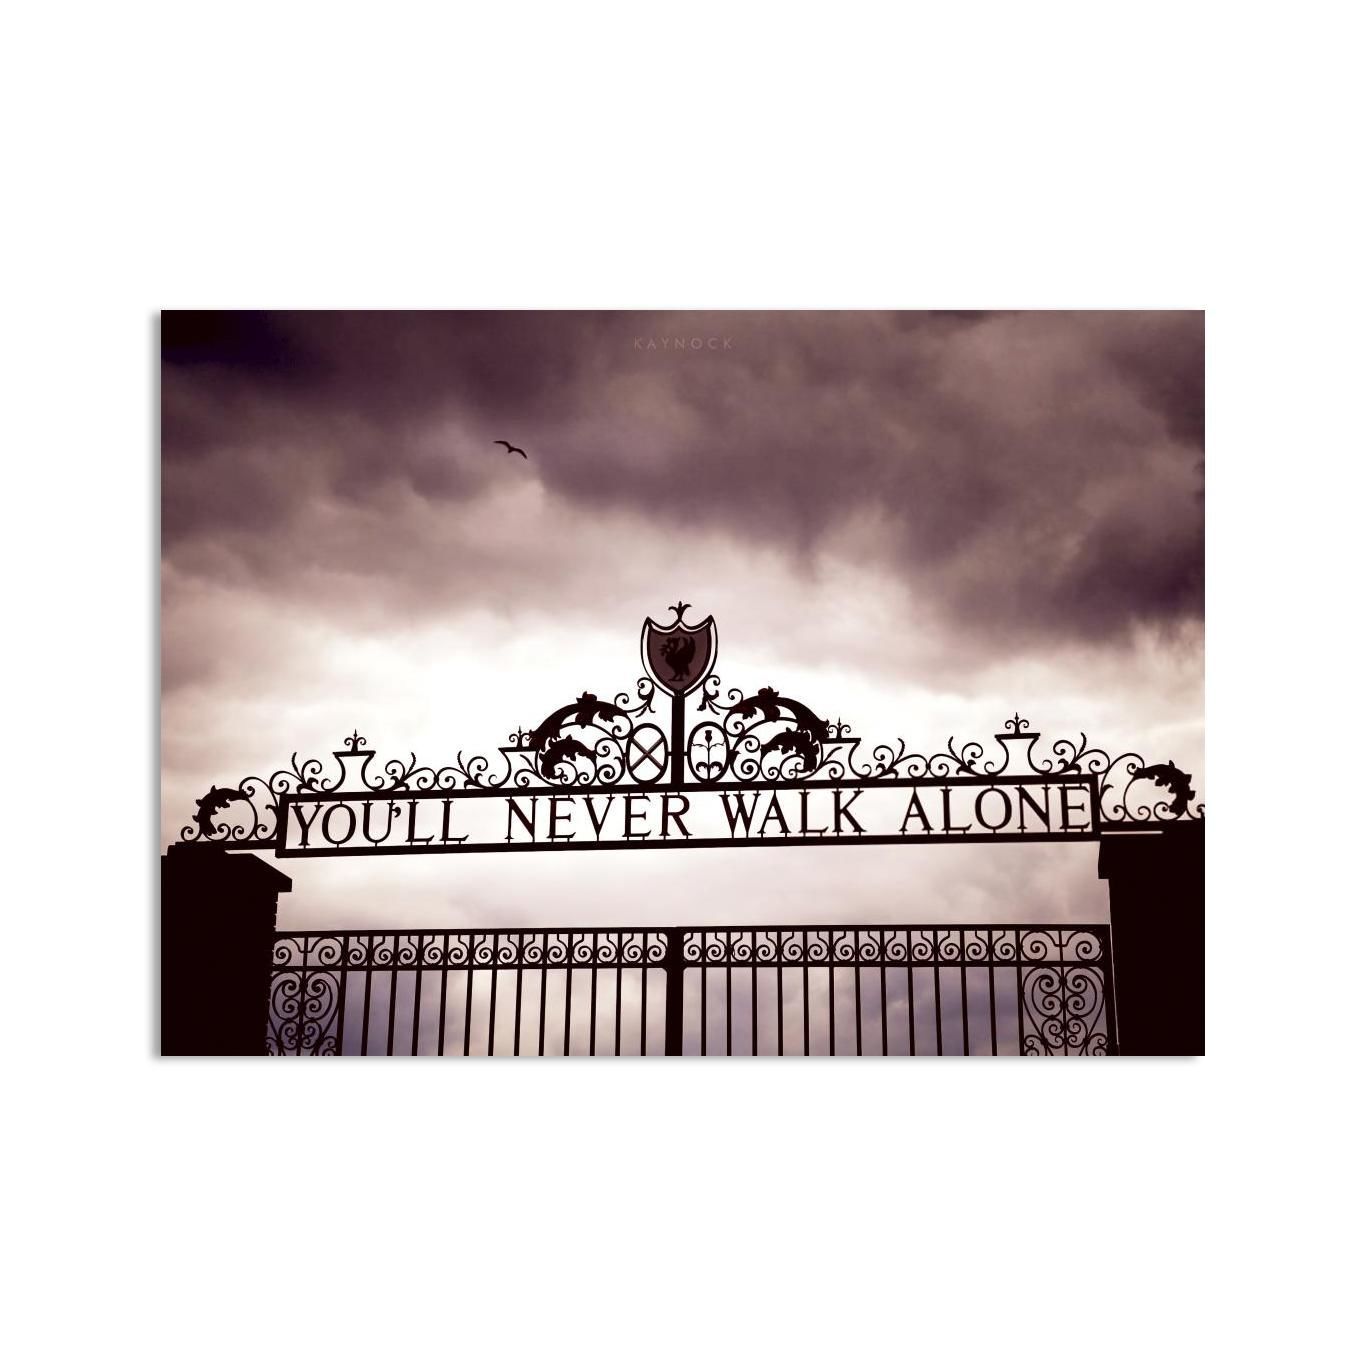 You'll never walk alone, Liverpool Canvas